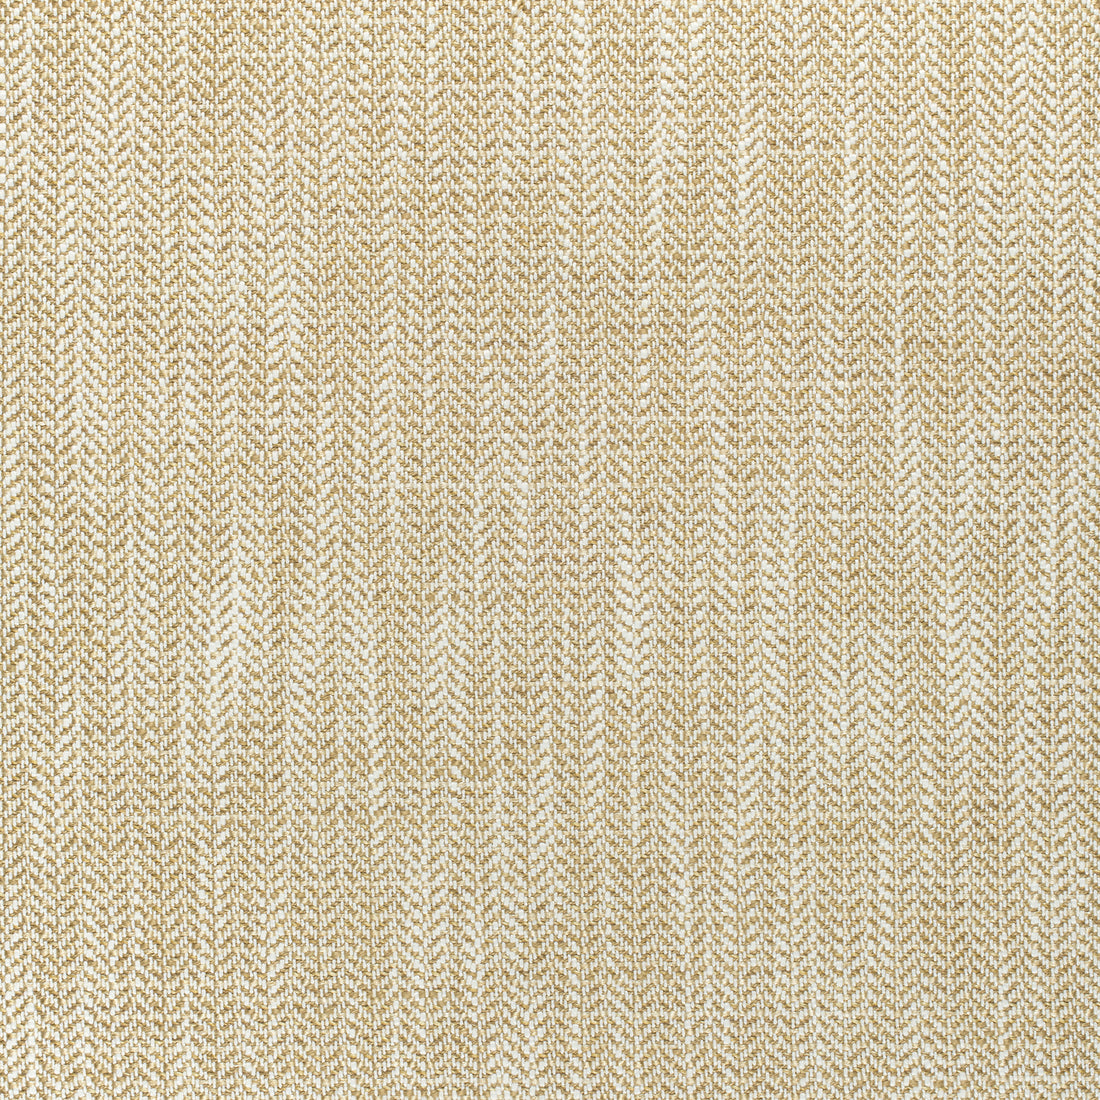 Ashbourne Tweed fabric in straw color - pattern number W80608 - by Thibaut in the Pinnacle collection